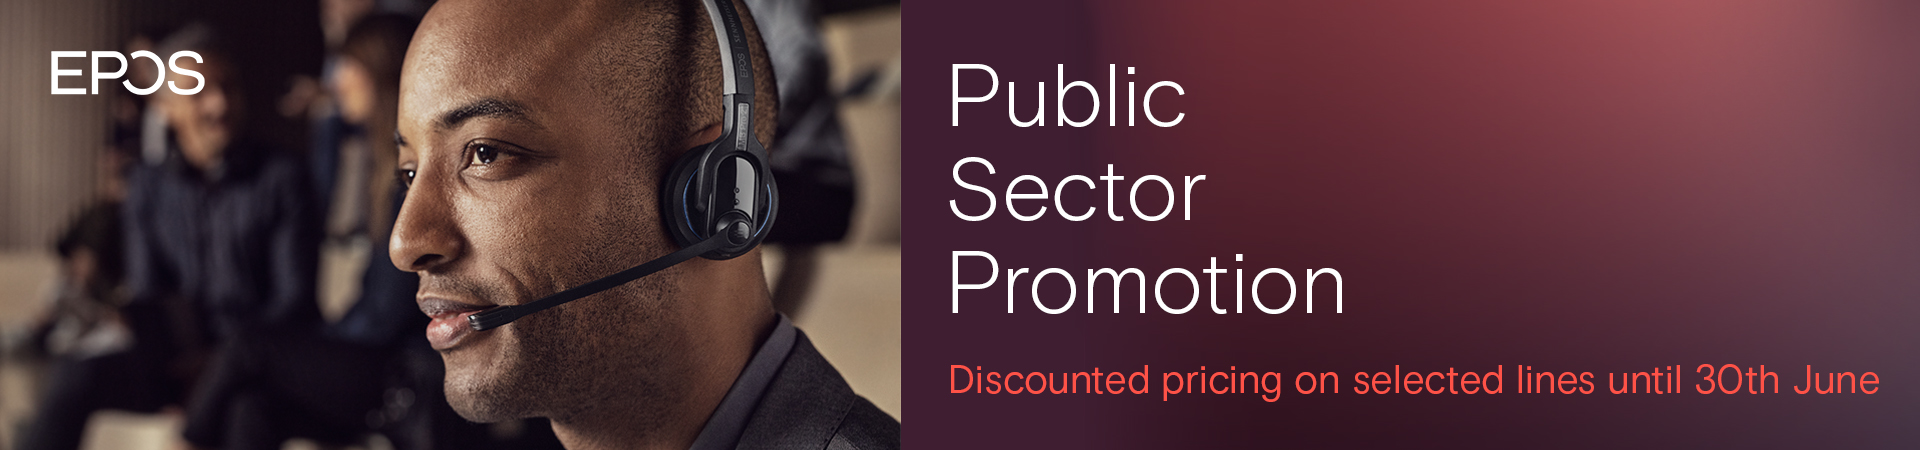 EPOS Public Sector Promotion - Discounted lines until 30th June from EPOS